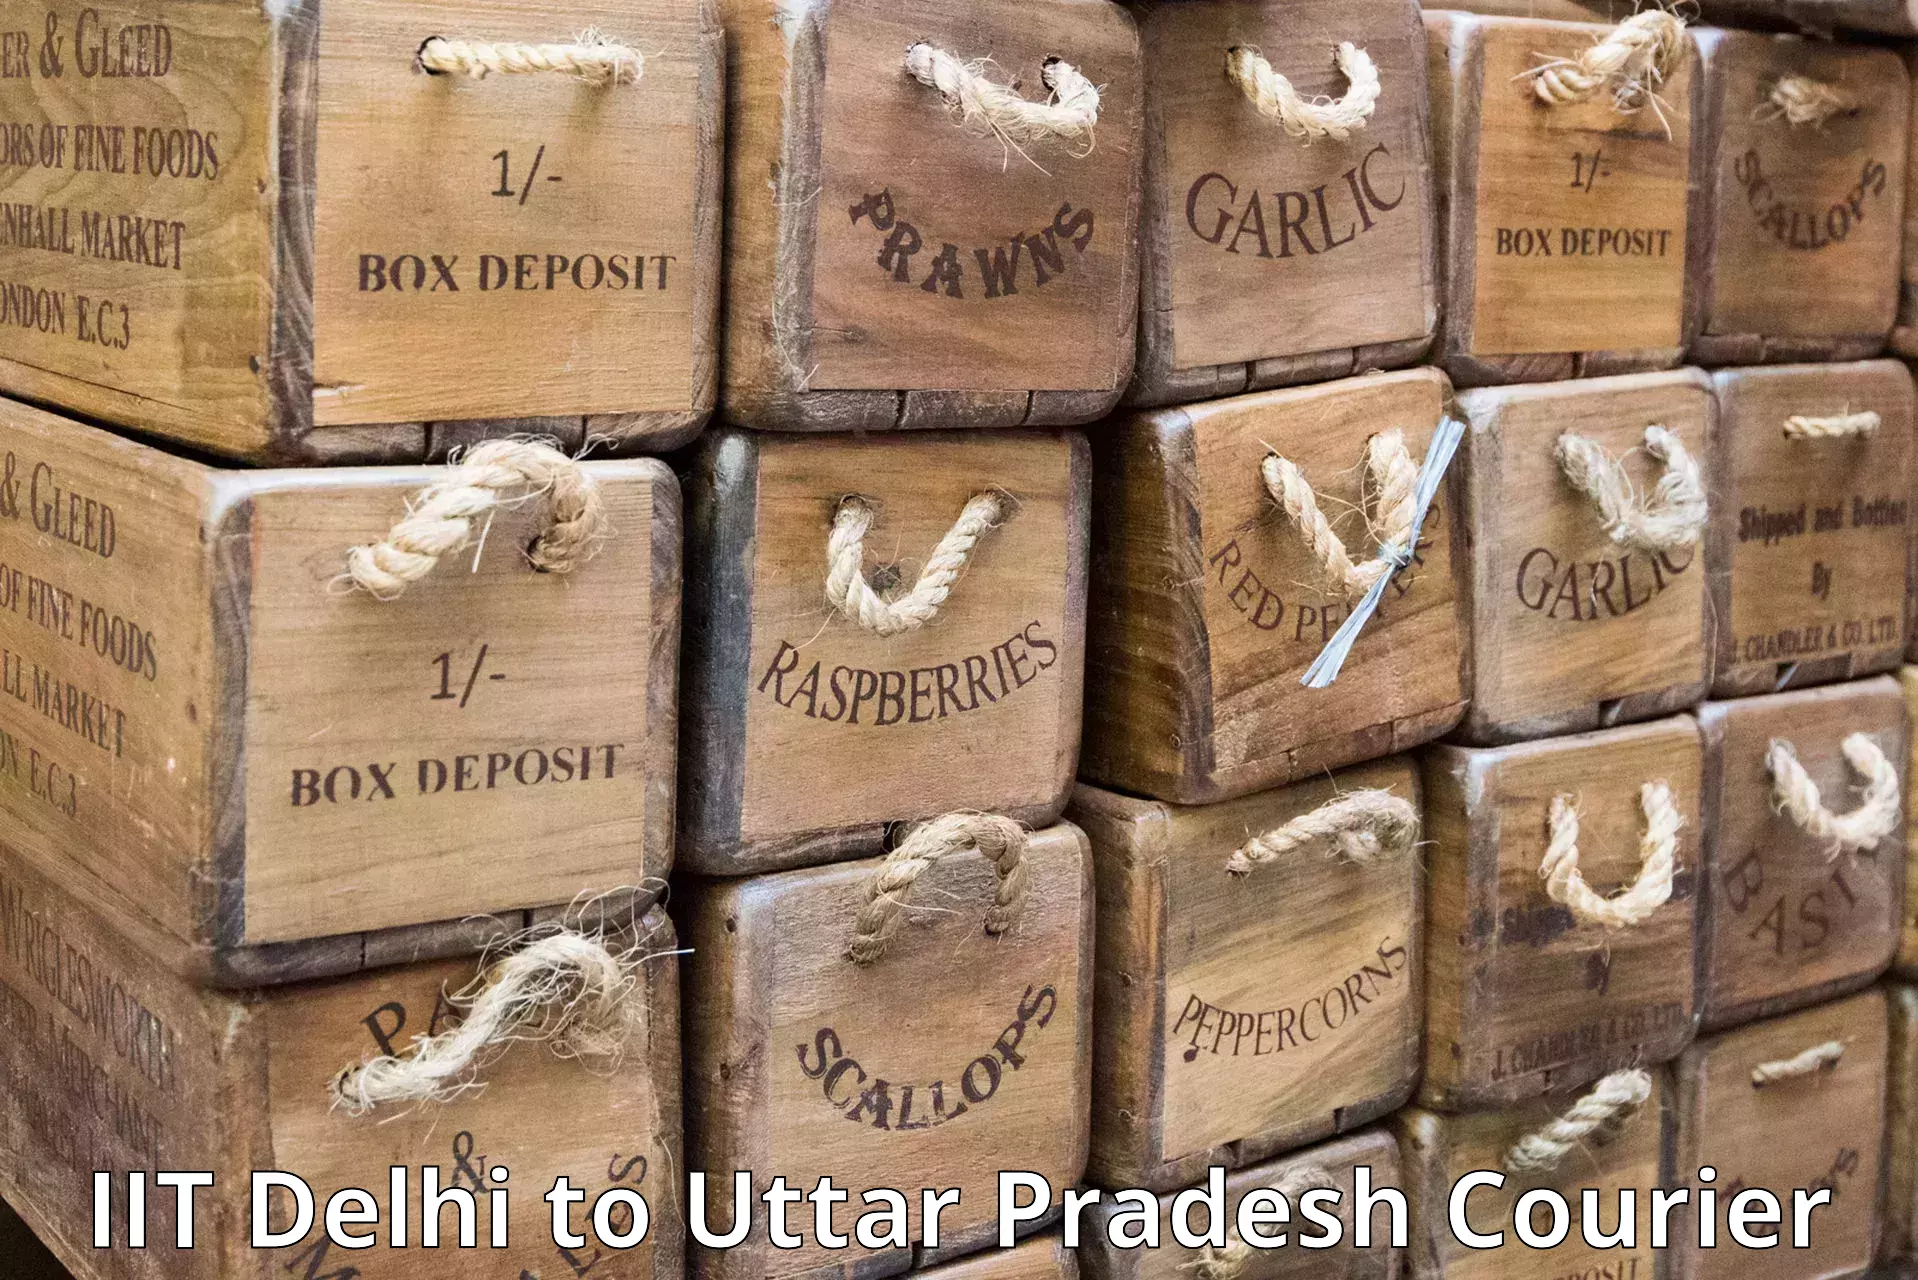 Easy access courier services IIT Delhi to Ratanpura